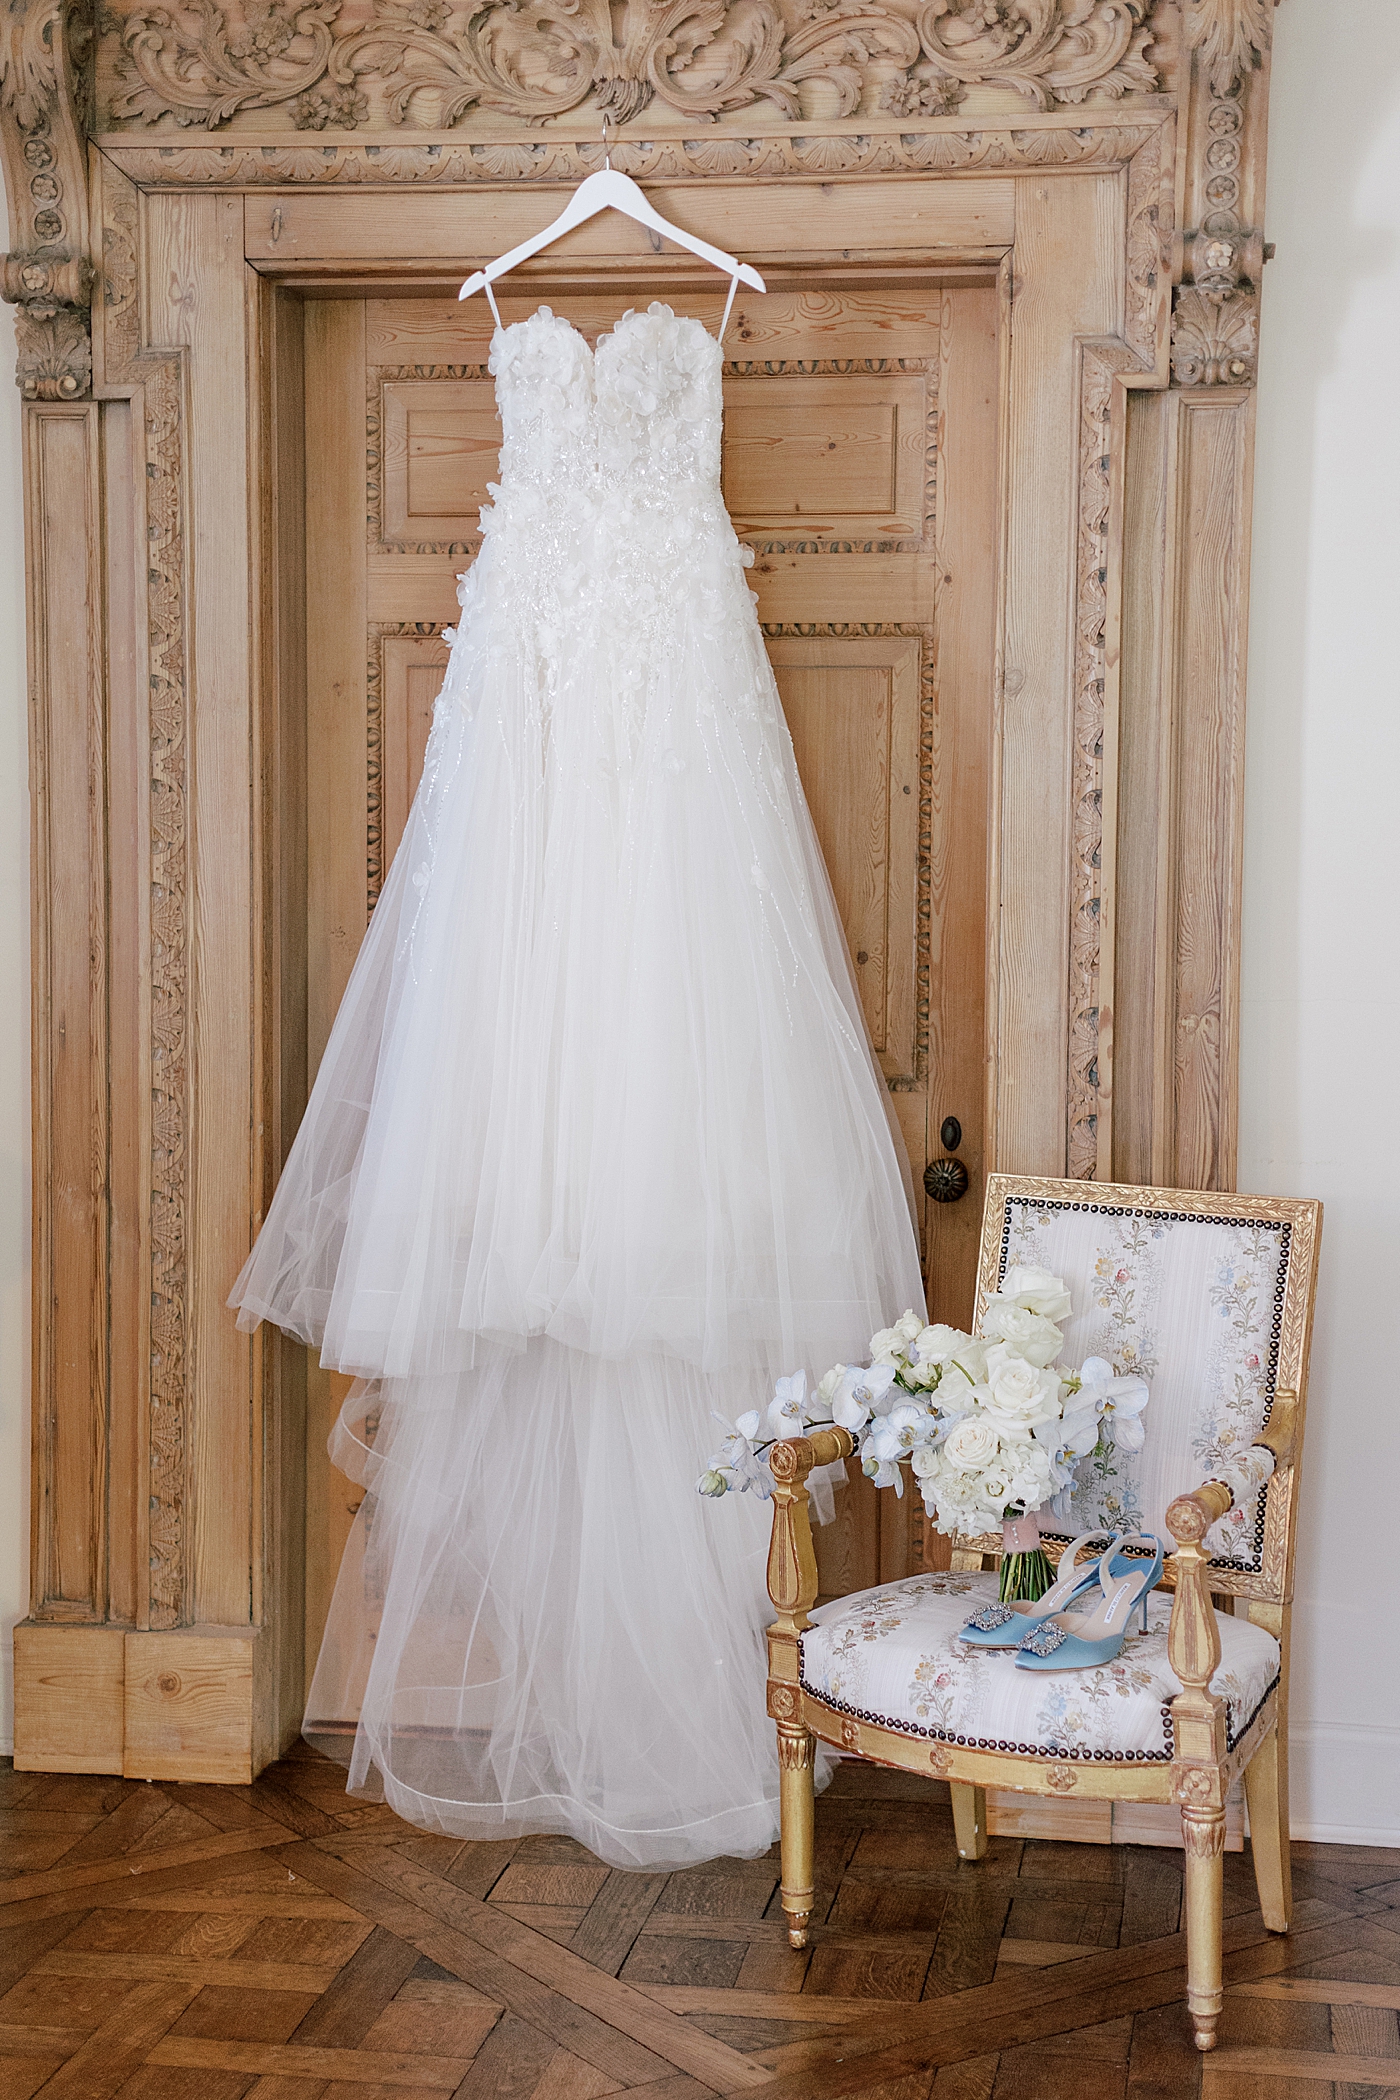 Wedding gown hanging from door | Image by Hope Helmuth Photography